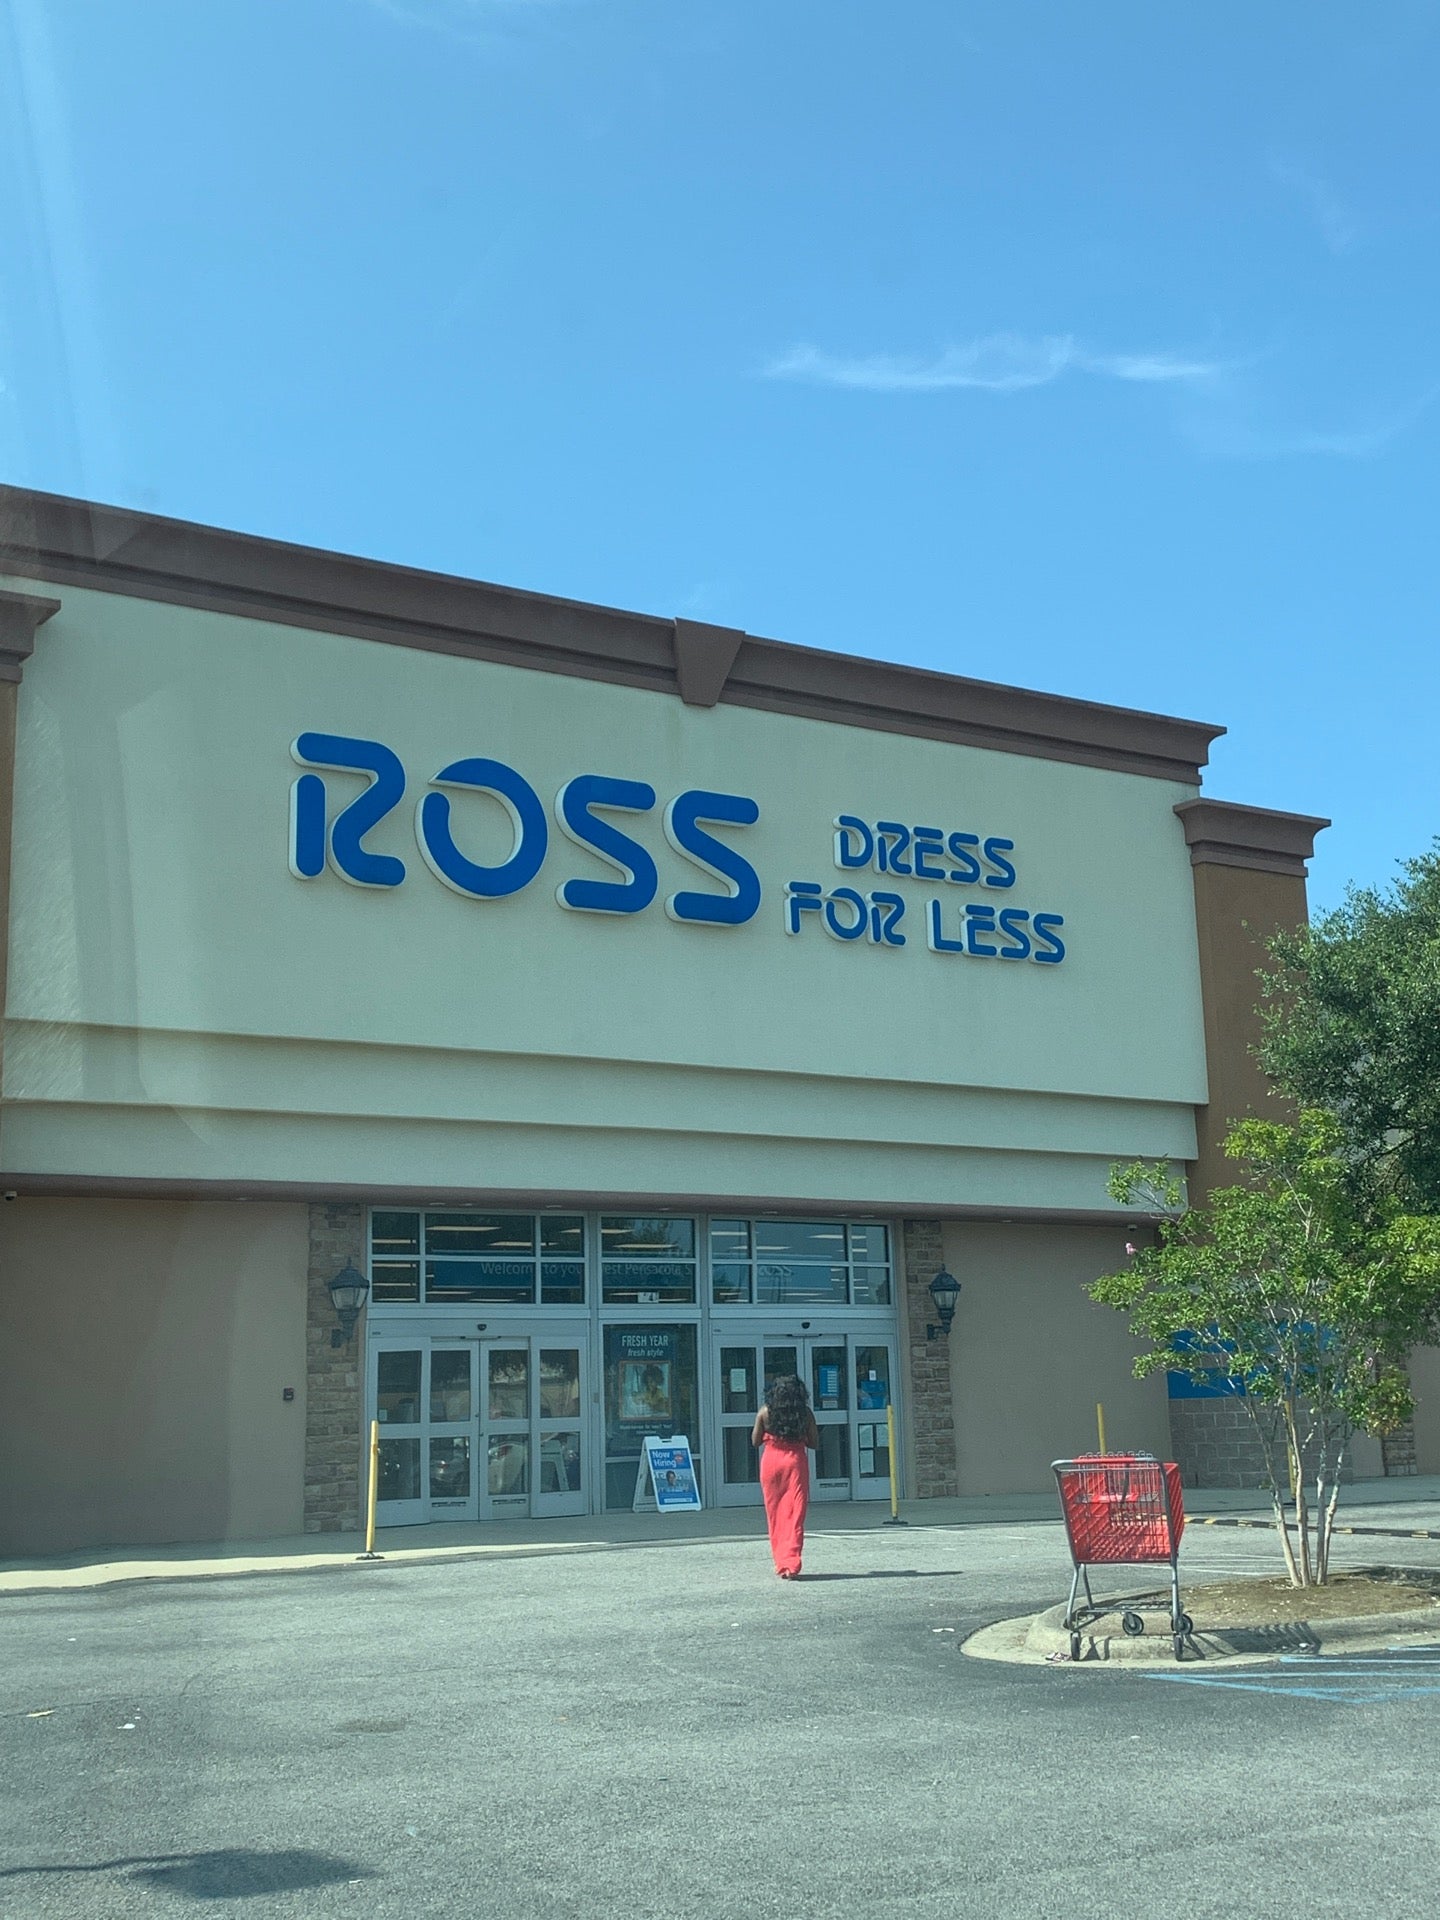 Ross Stores Near Me - The Holiday Hours Time